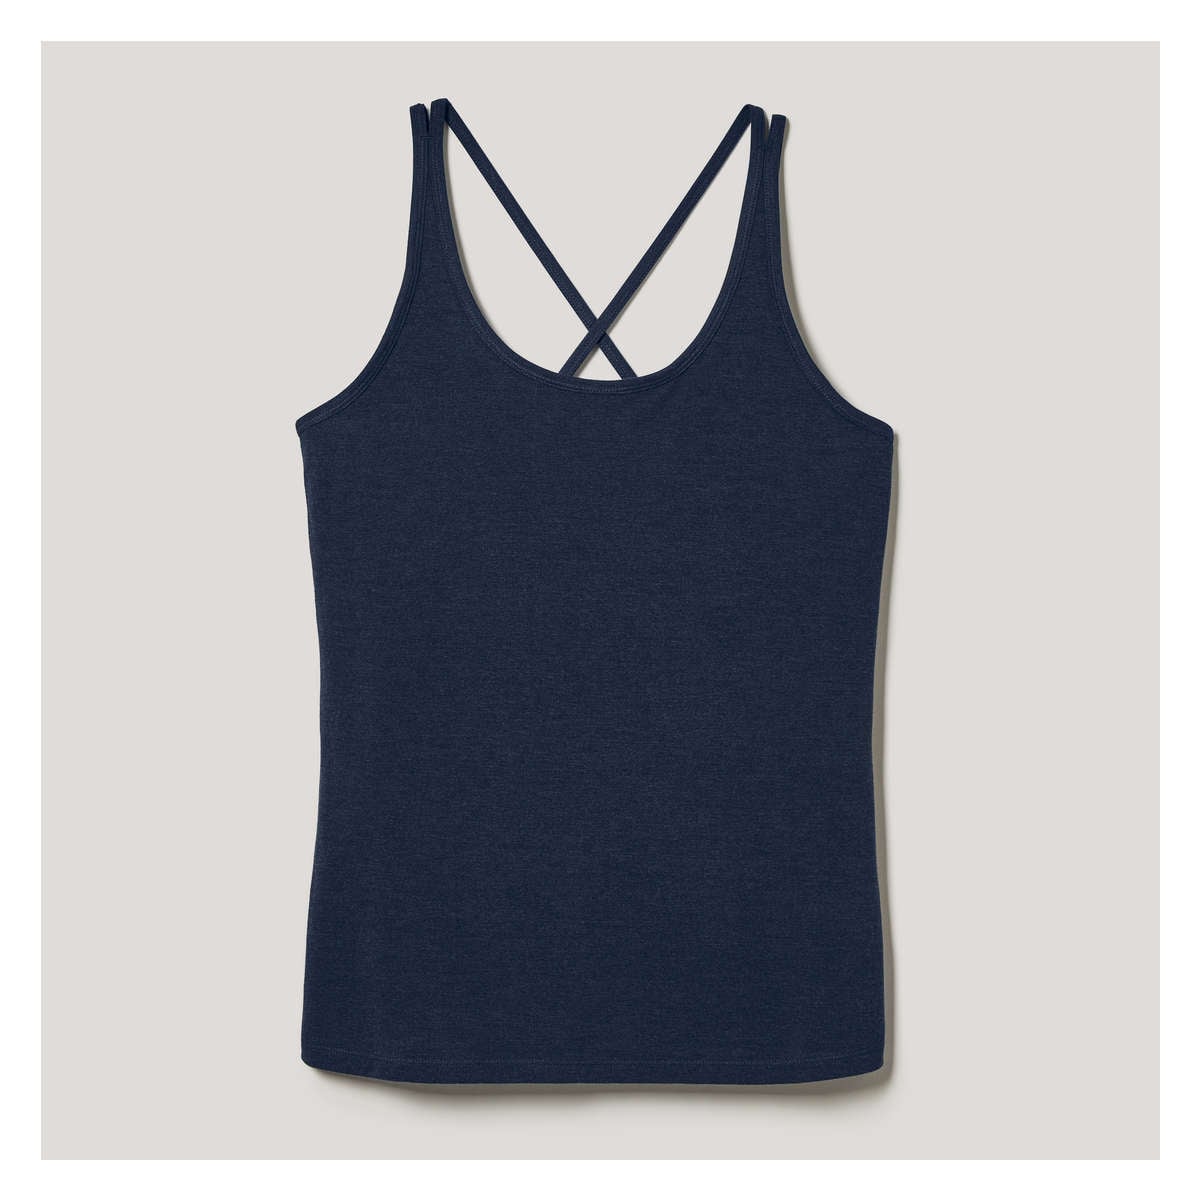 Strappy Active Tank in Black from Joe Fresh